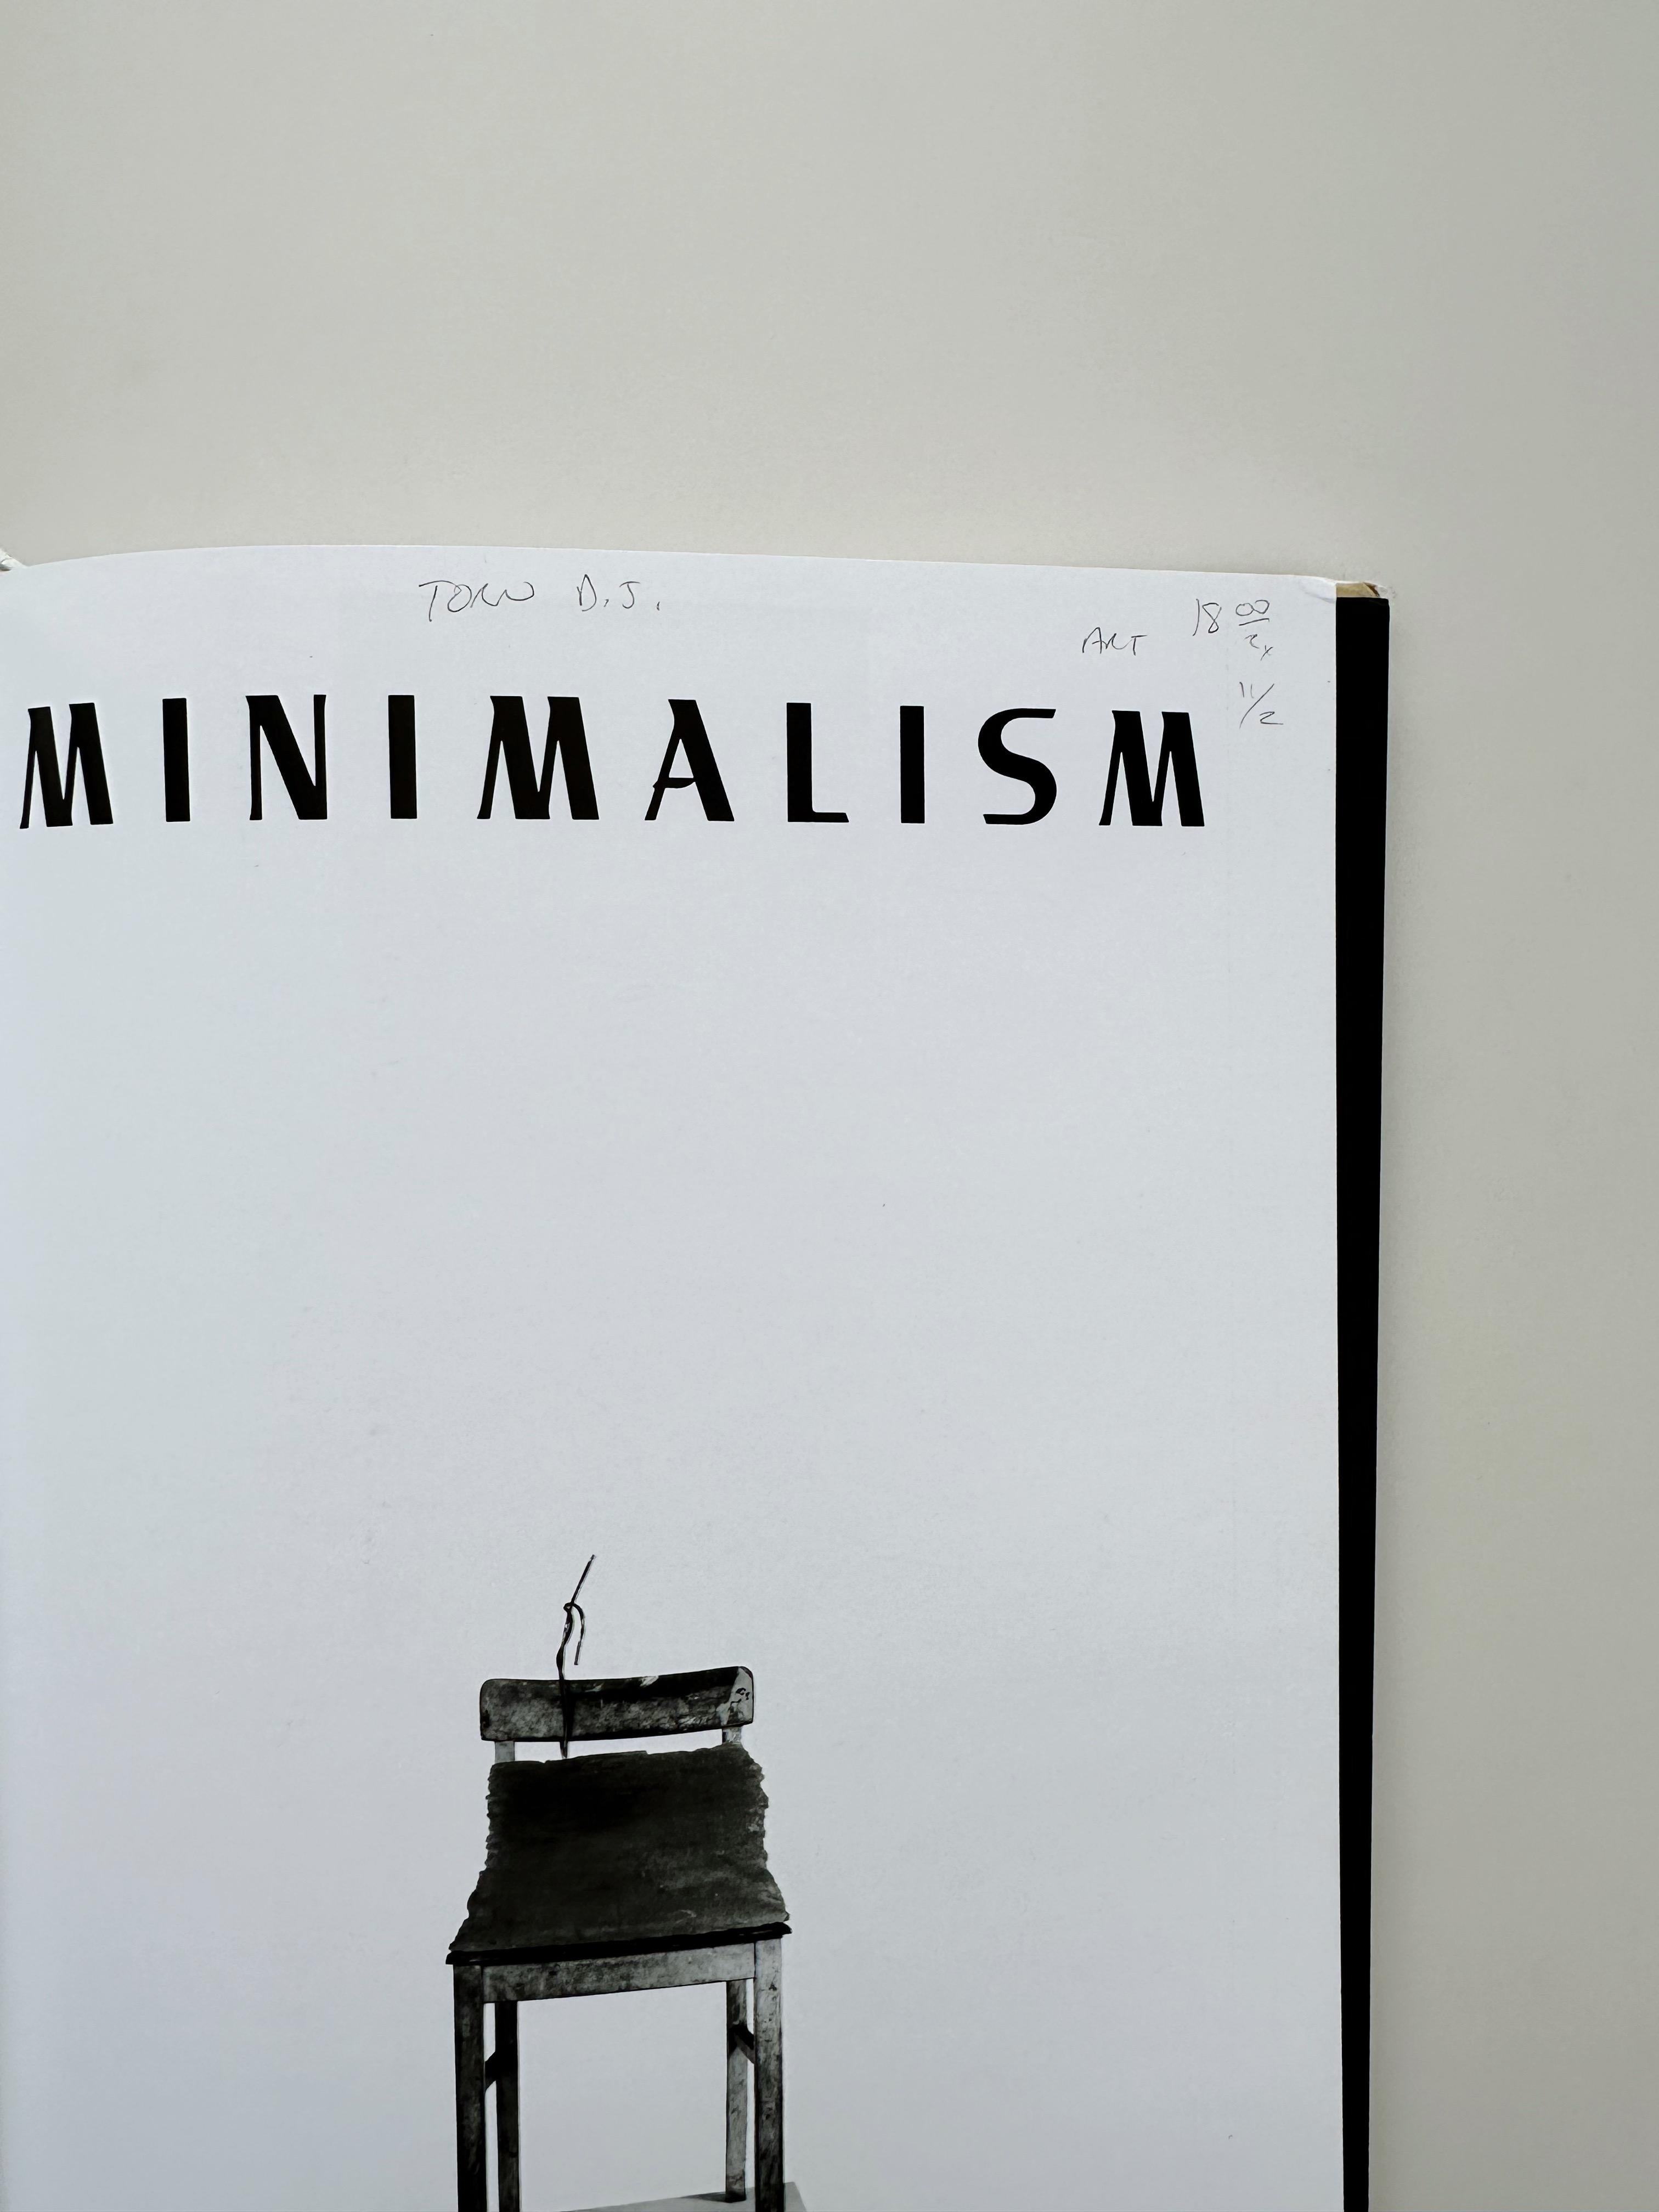 Minimalism by Kenneth Baker, 1998

Hard cover, Dust Jacket

//

9 x 11.5
133 pages

//  

*Good condition, minor signs of use, couple of scribbles on pages